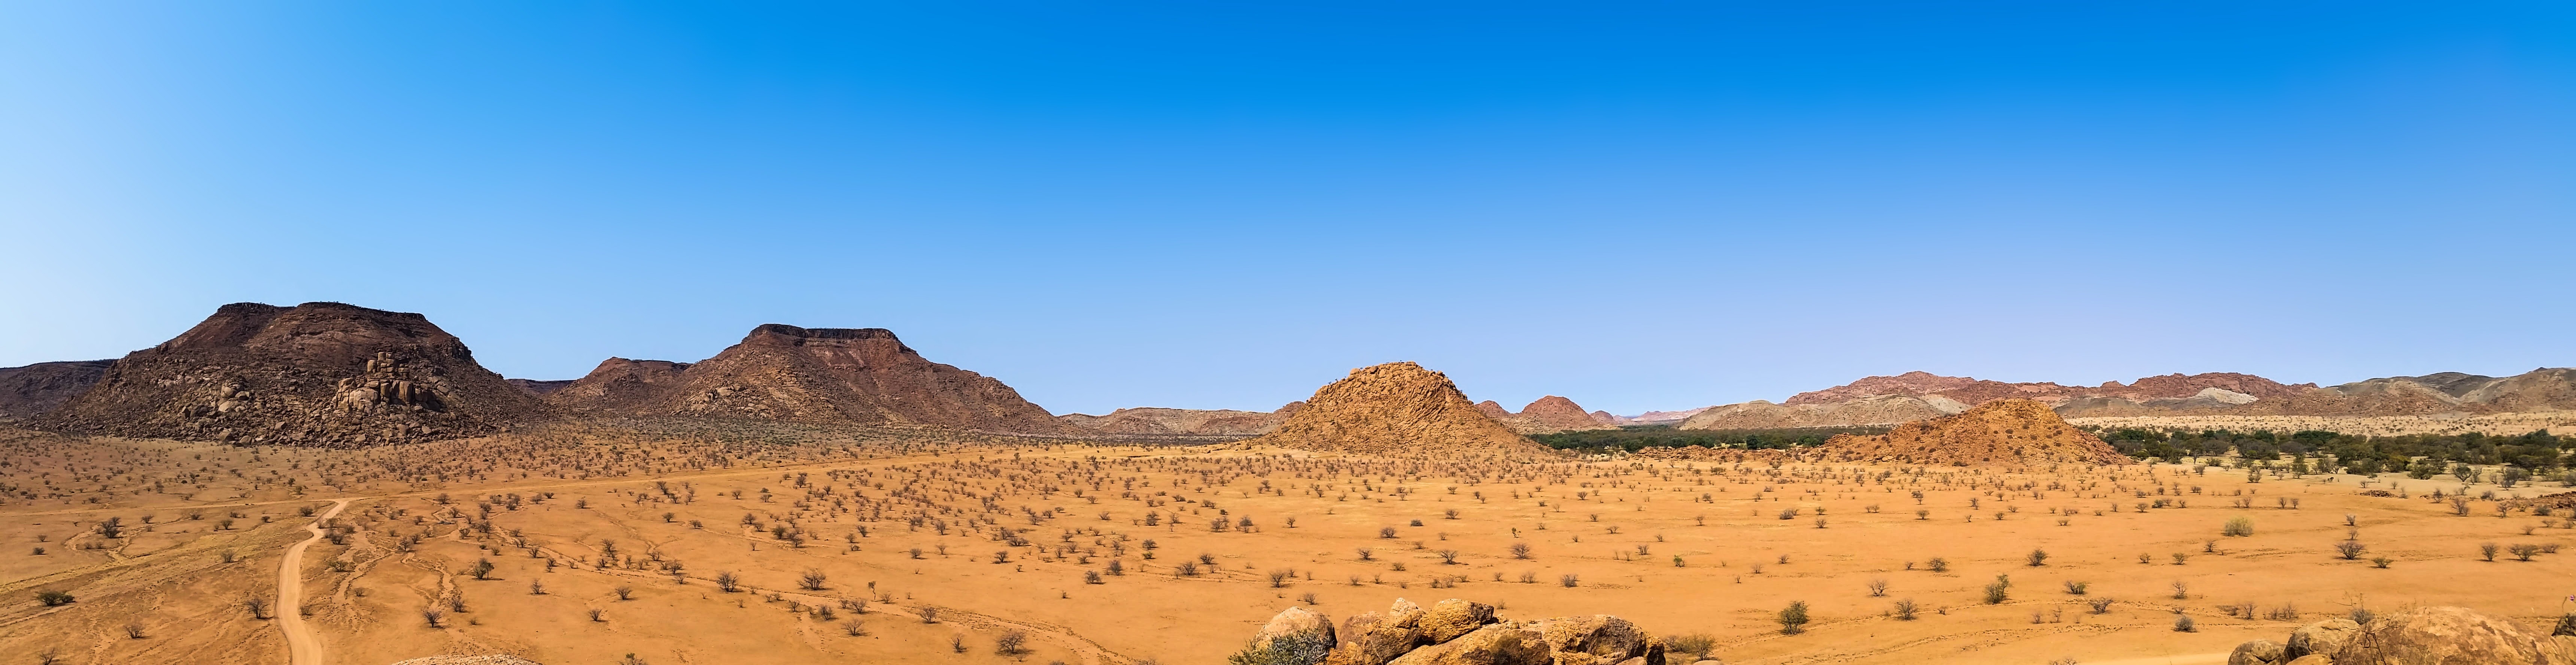 Scenic view of desert against clear sky photo